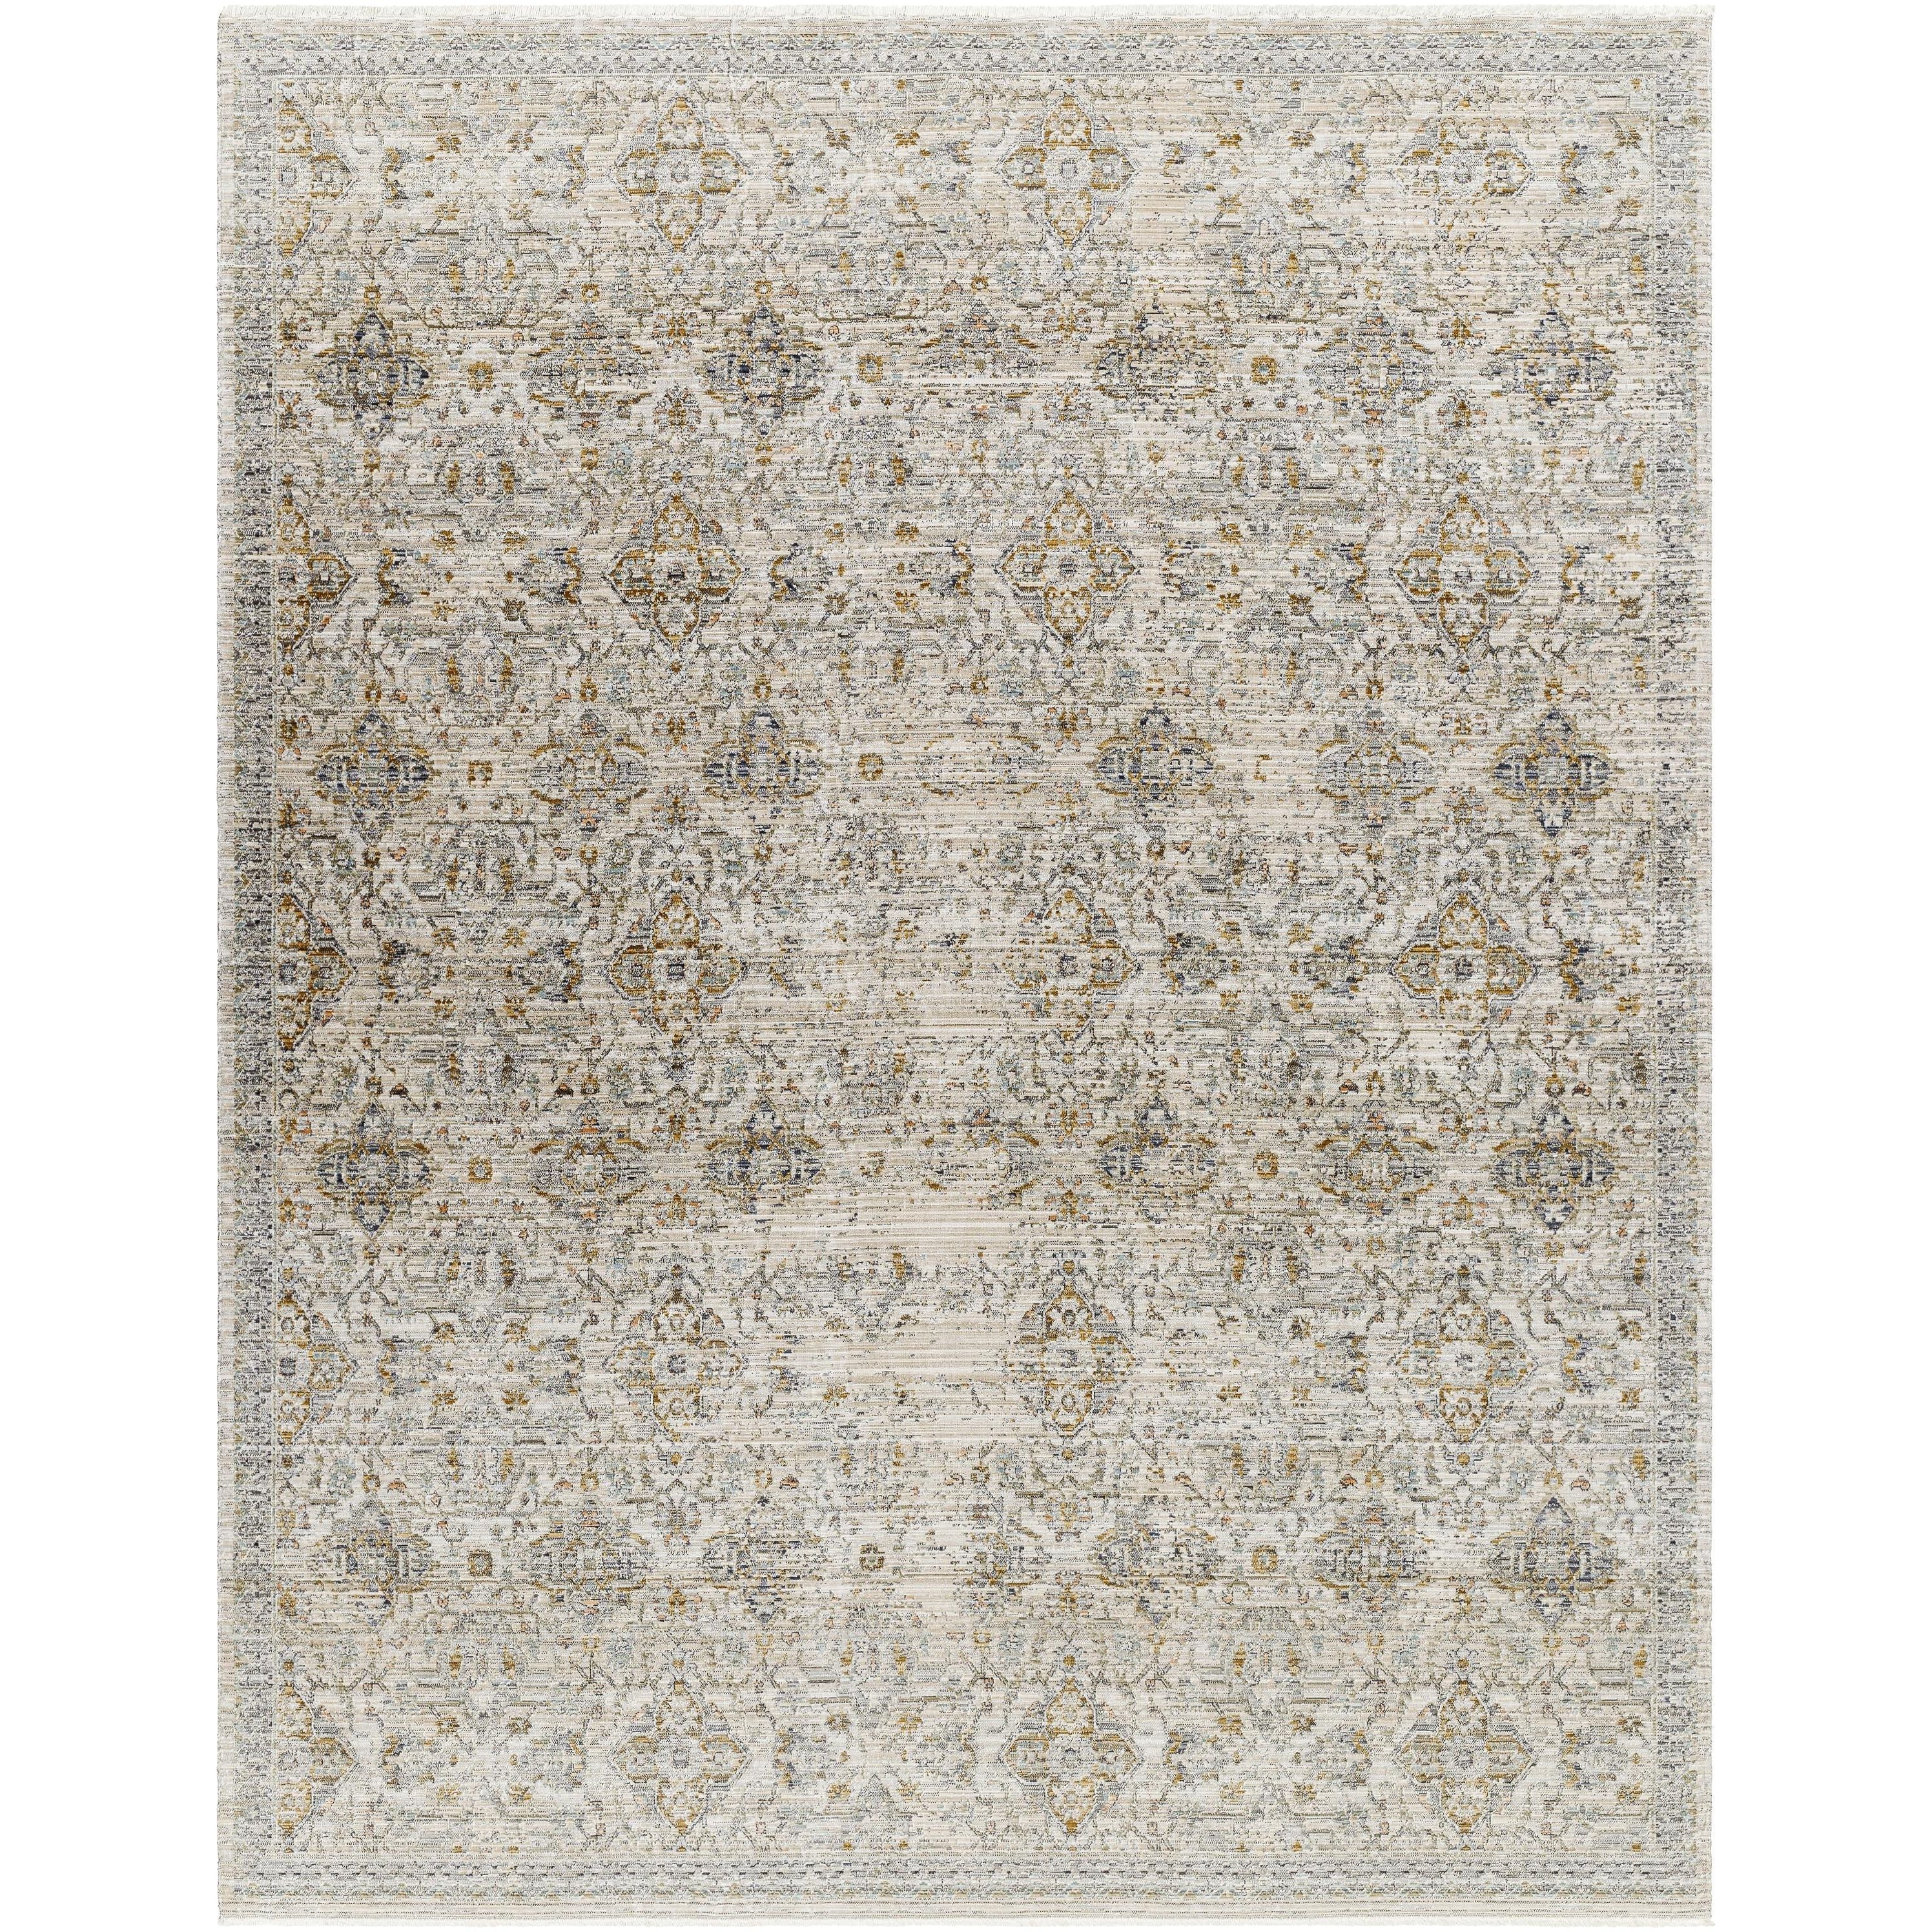 Introduce your home to the timeless beauty of the Margaret area rug! This special piece from our Becki Owens x Surya collaboration is the perfect way to add a vintage-inspired touch to any space. Amethyst Home provides interior design, new home construction design consulting, vintage area rugs, and lighting in the Washington metro area.